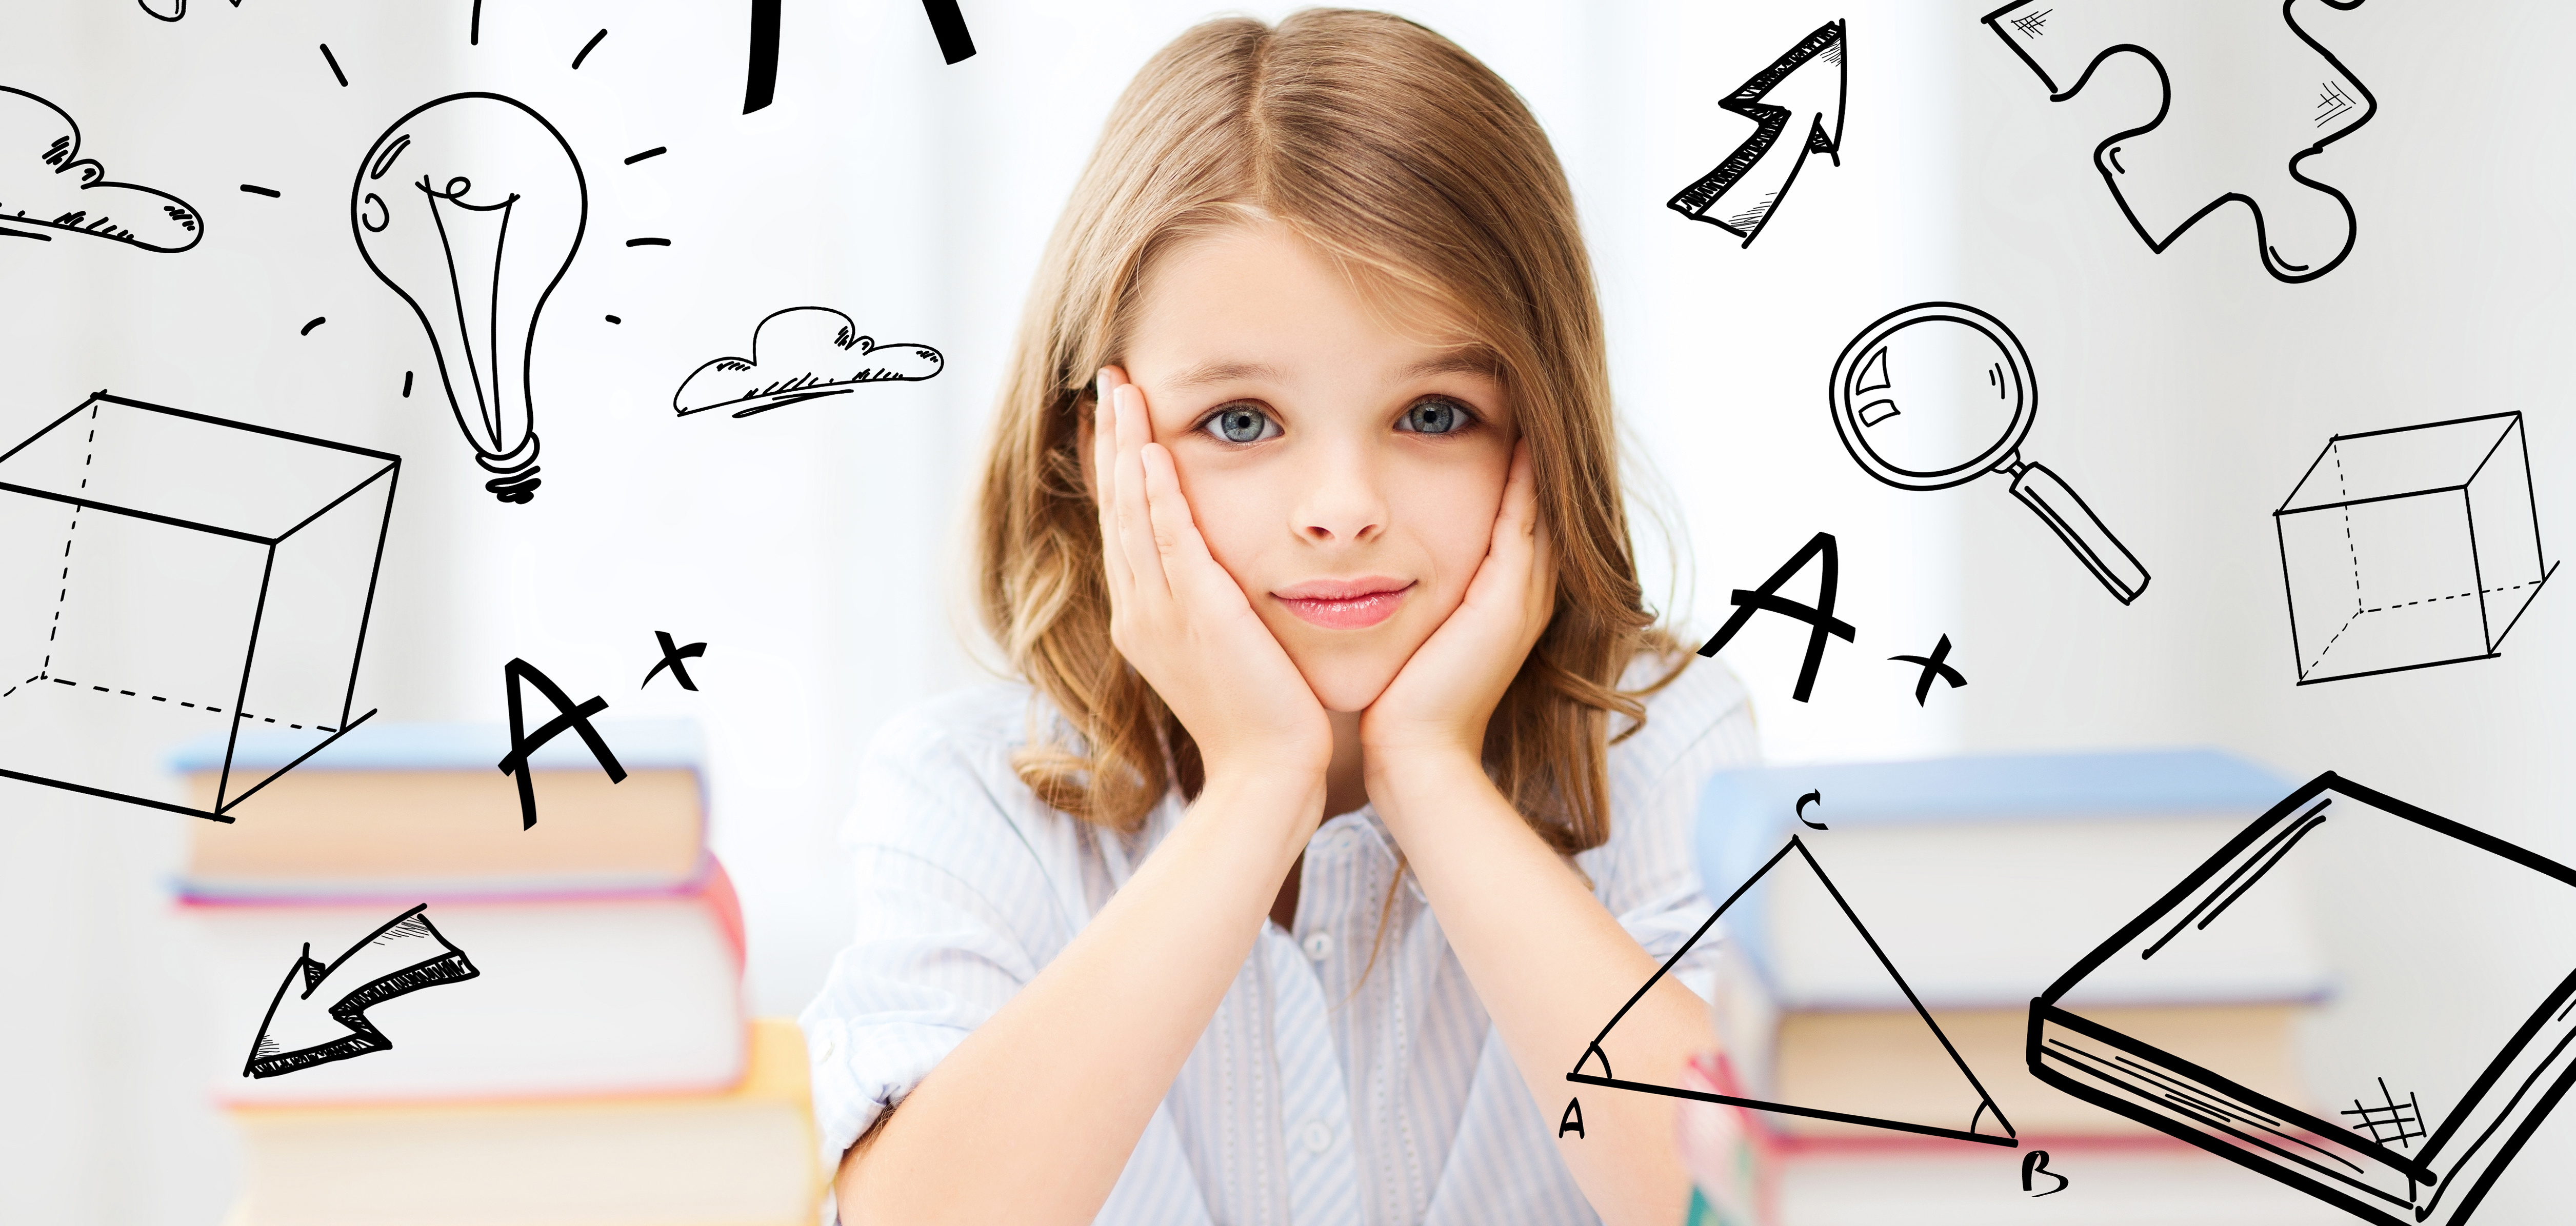 How To Help Add Child Focus On Homework 5 Tricks For Helping Your